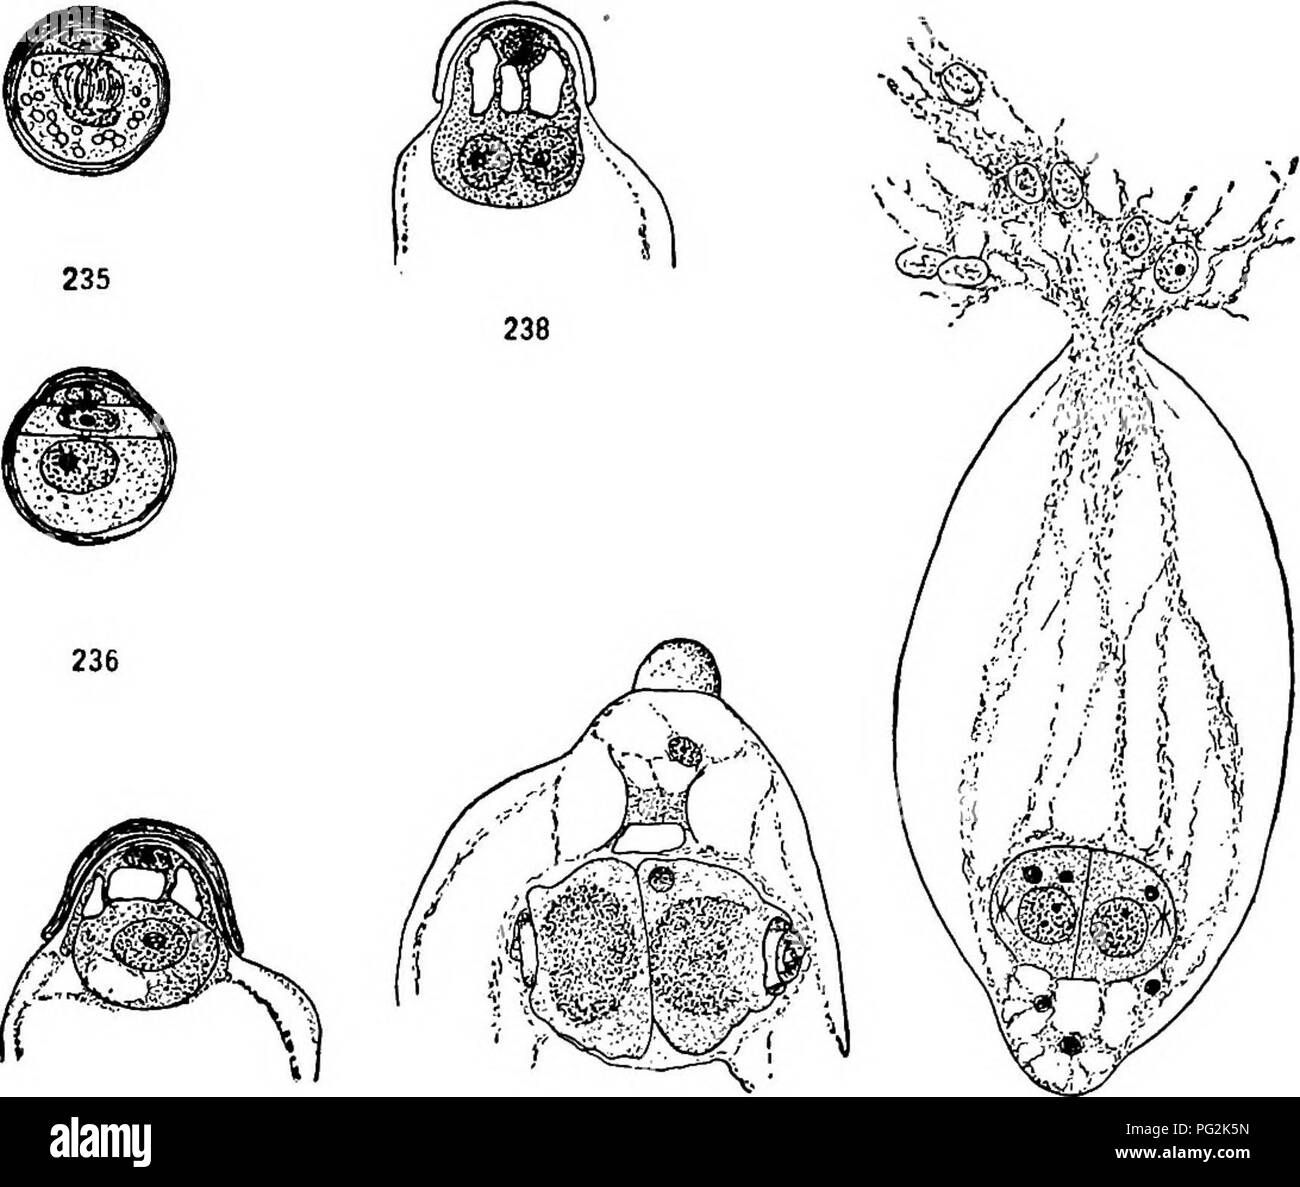 . Morphology of gymnosperms. Gymnosperms; Plant morphology. GINKGO ALES 207 becoming brown and forming a resistant beak that long persists as a cap on the sac. The pollen grains, carried well below the beak by the deepening of the chamber, send out their tubes in every direction into the adjacent nucellar tissue, but chiefly away from the embryo. 240 239 Figs. 235-240.—Ginkgo biloba: the male gametophyte; fig. 235, pollen grain, showing evanescent prothallial ceU and persistent prothallial cell; the mitosis in the antheridium initial will form the generative and tube cells; April 24; X500; fig Stock Photo